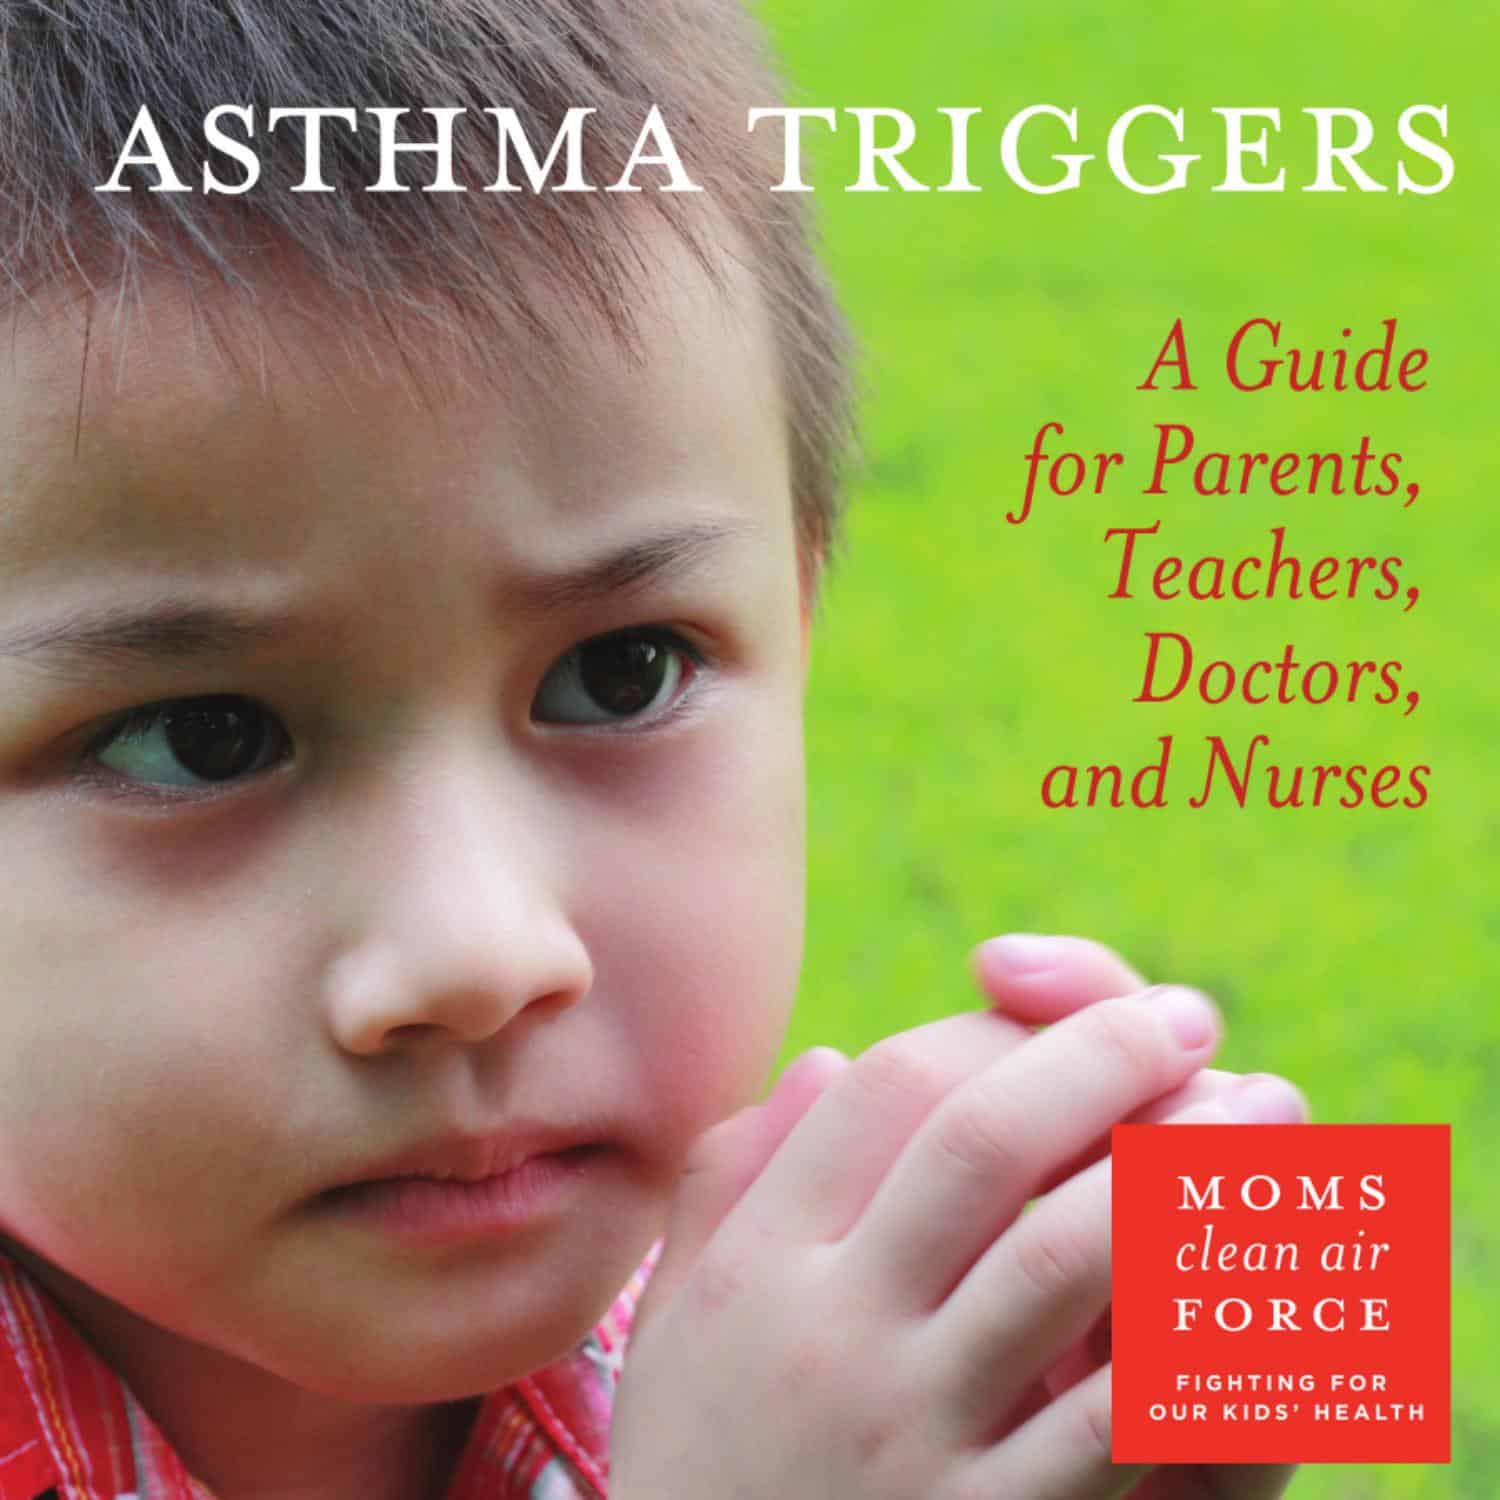 ASTHMA TRIGGERS by Moms Clean Air Force